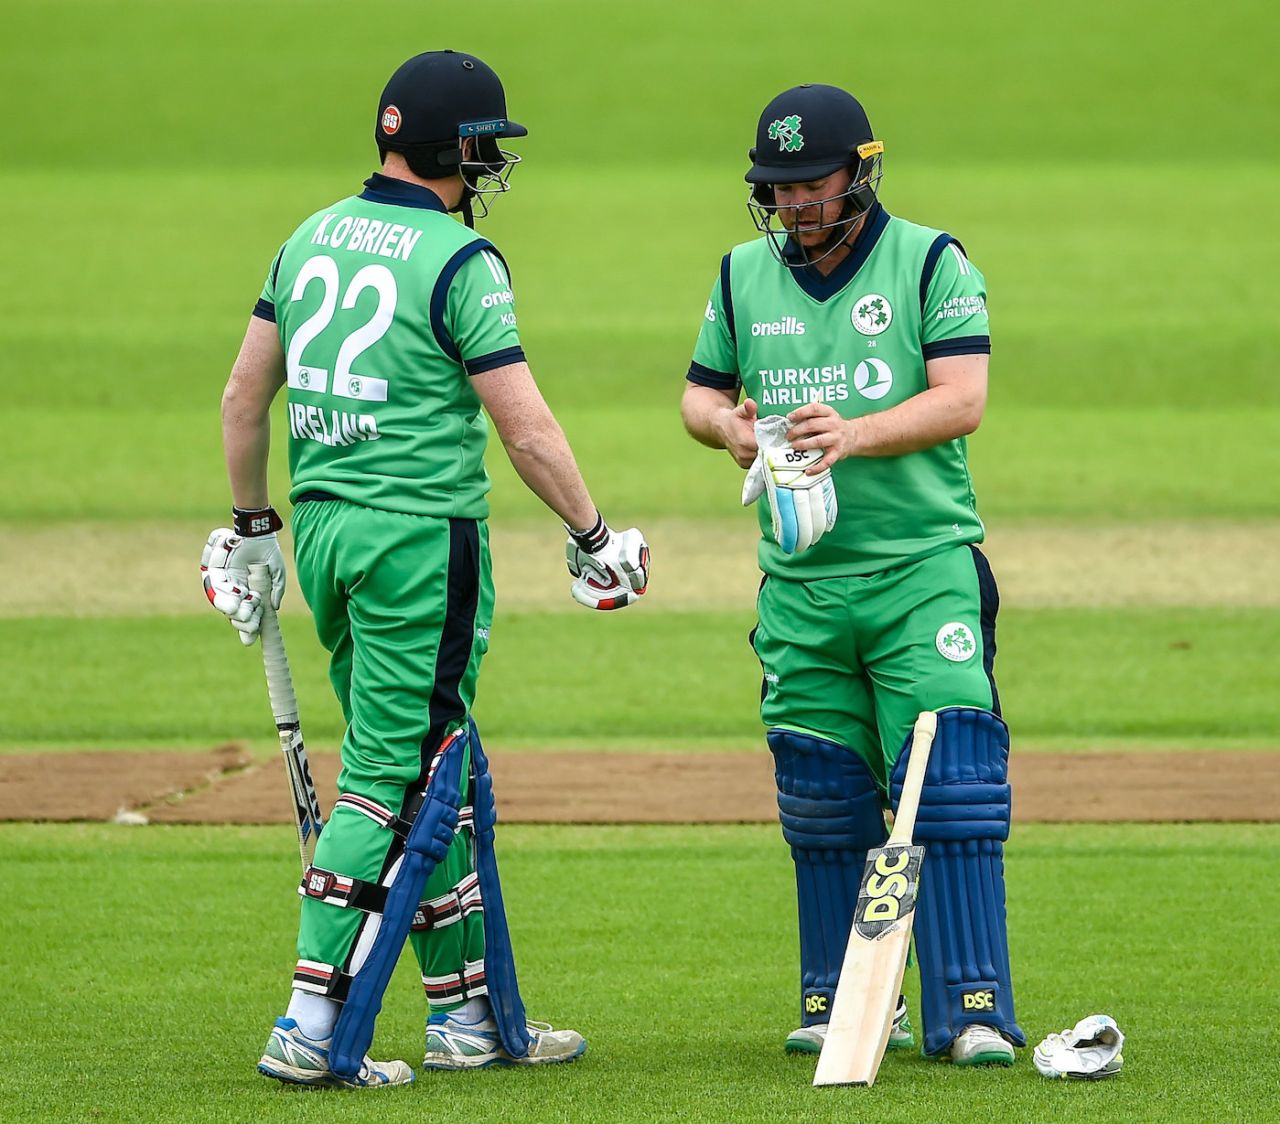 Kevin O'Brien and Paul Stirling bat in an ODI against Afghanistan, Belfast, May 19, 2019
